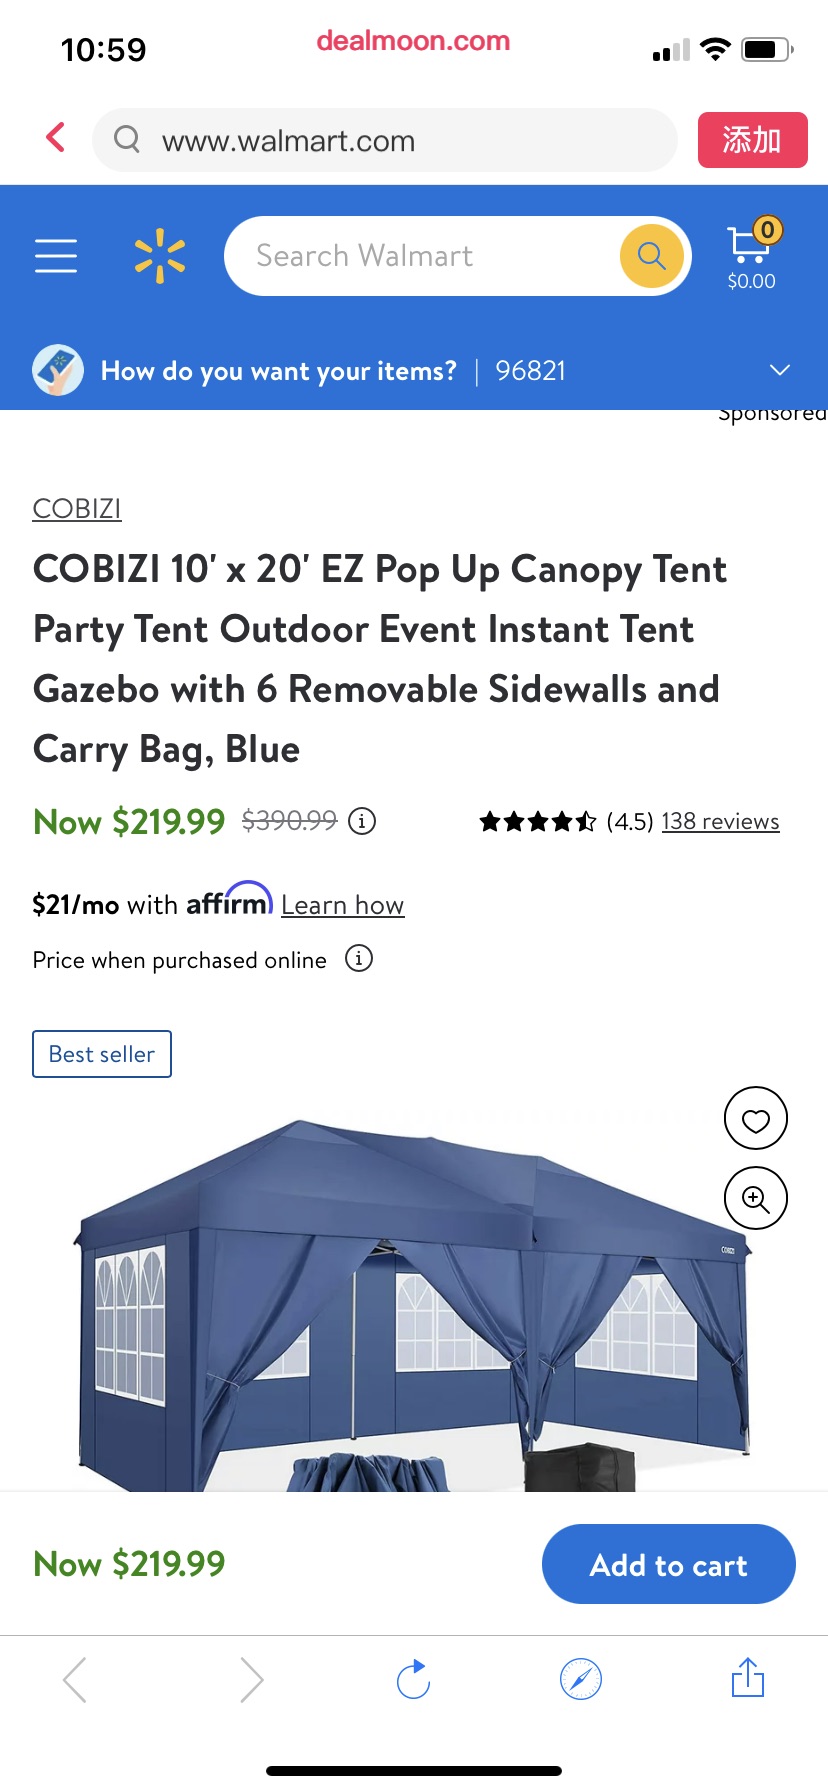 COBIZI 10' x 20' EZ Pop Up Canopy Tent Party Tent Outdoor Event Instant Tent Gazebo with 6 Removable Sidewalls and Carry Bag, Blue - 帐篷